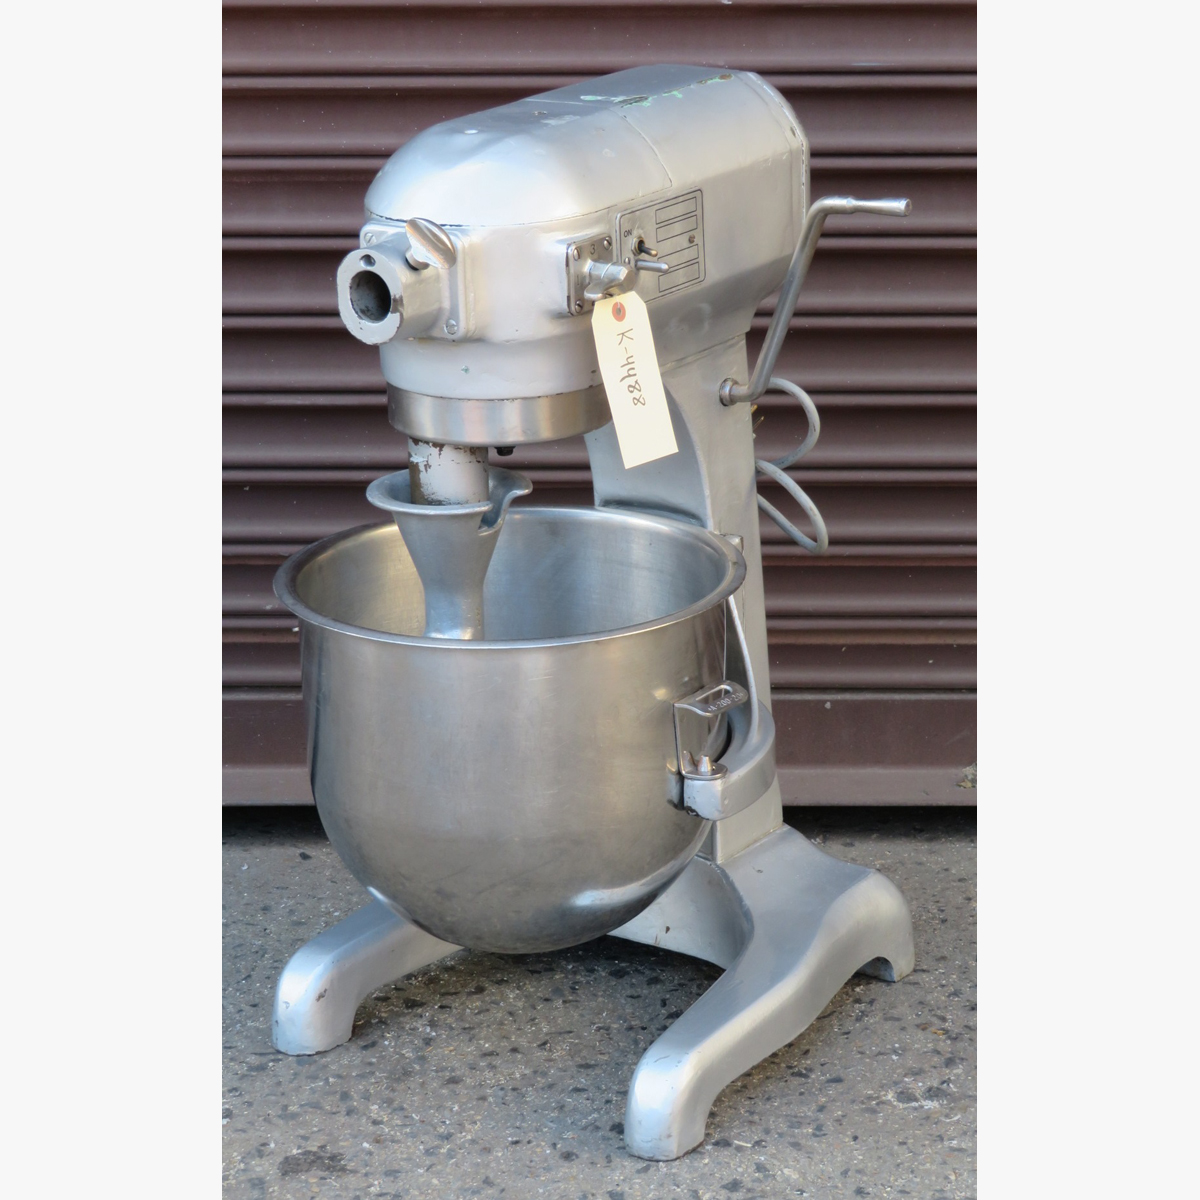 Hobart 20 Quart A200 Mixer, Used Great Condition